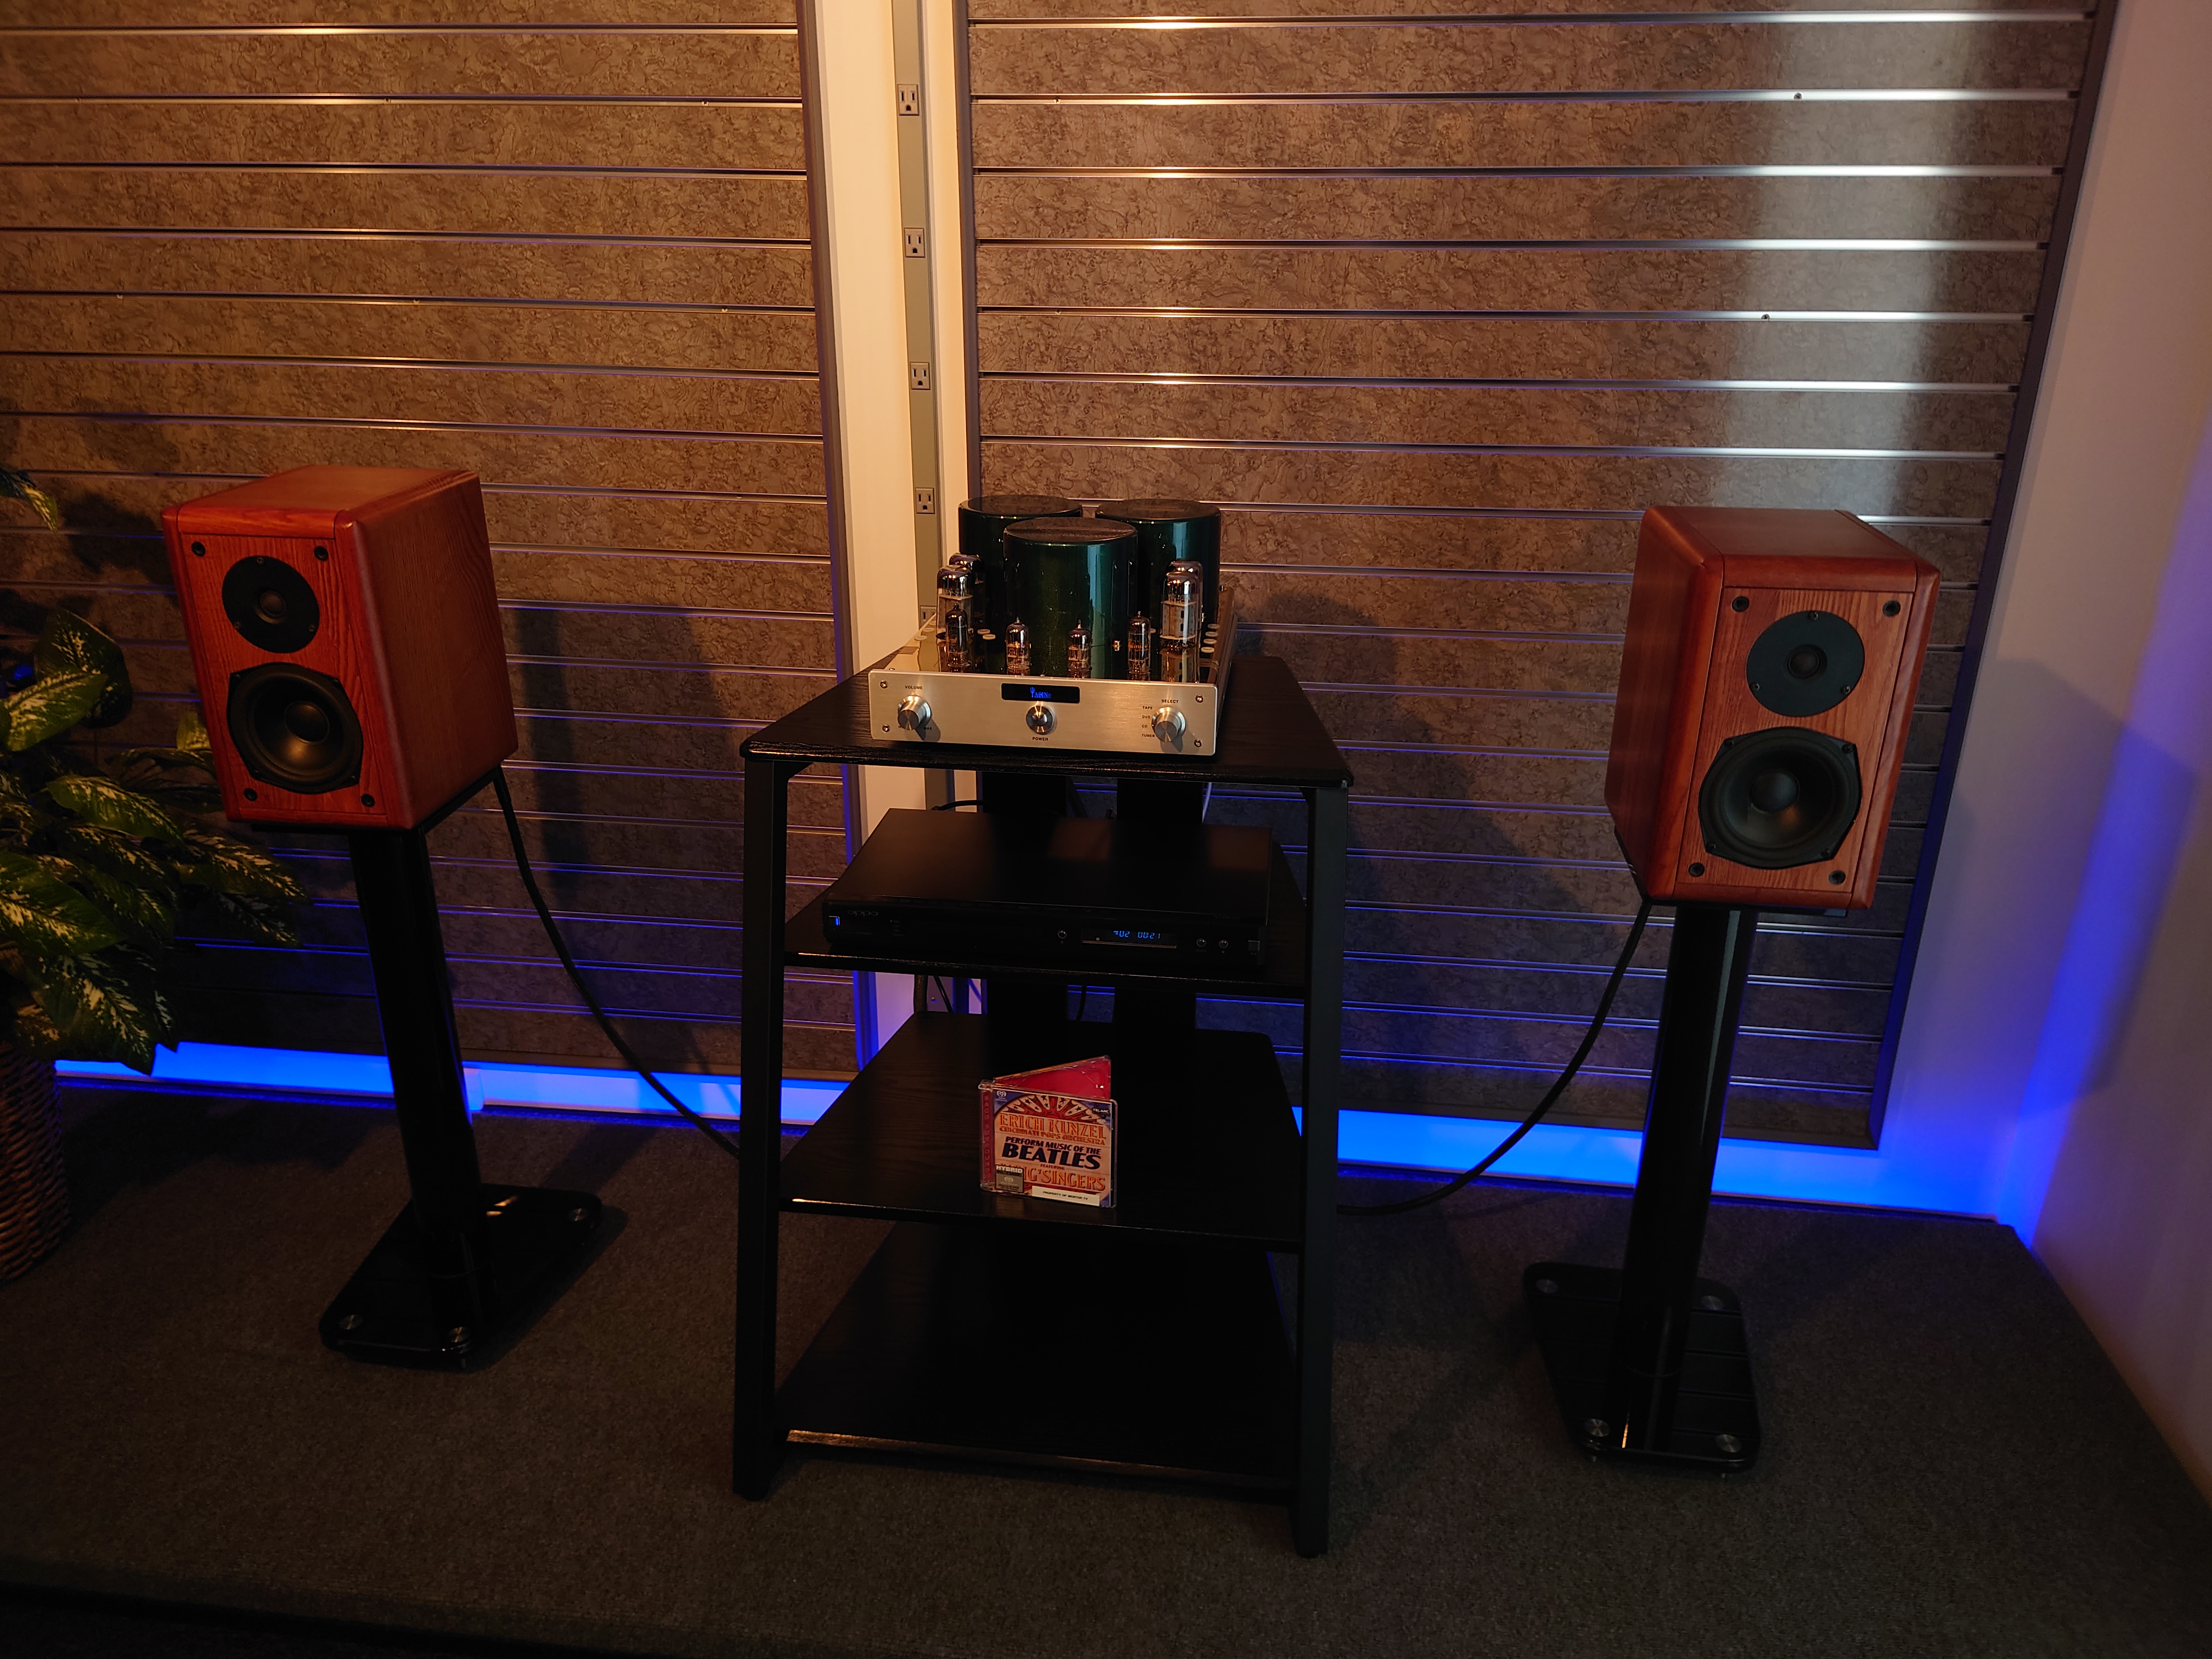 Yaqin tube amp and Opera Duetto speakers